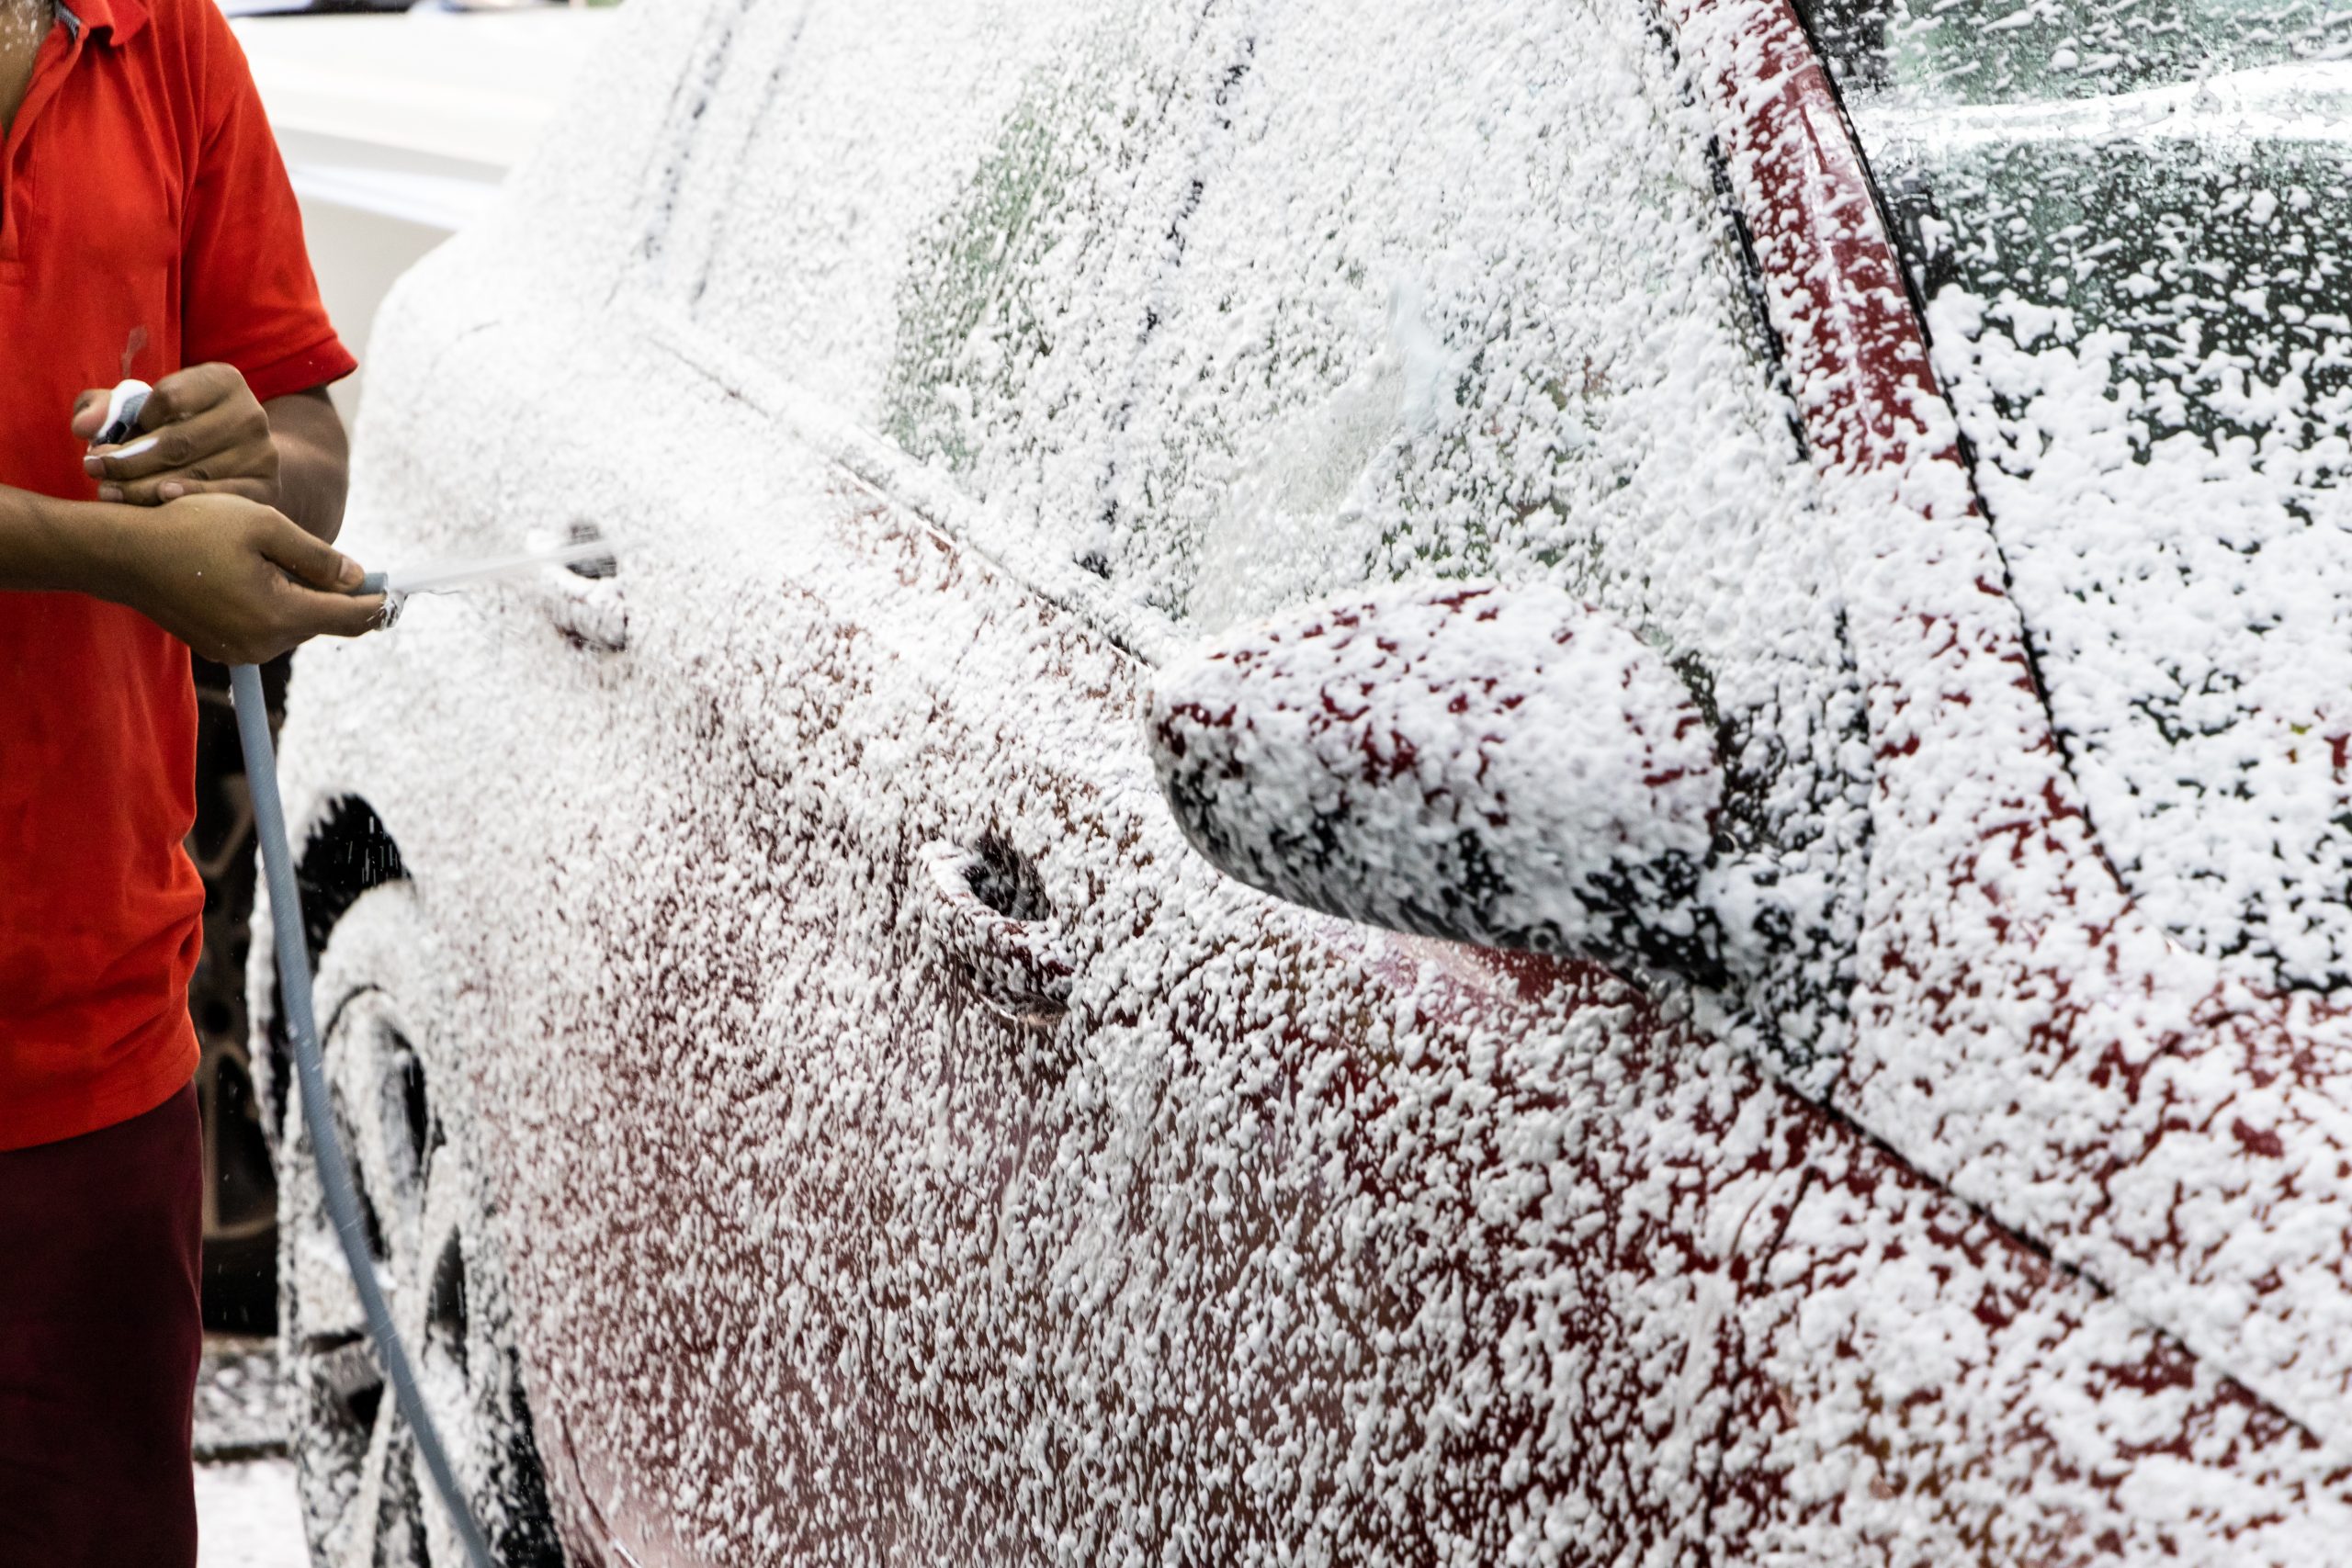 Detergent soap foam known as snow wash sprayed onto car at garage before washing